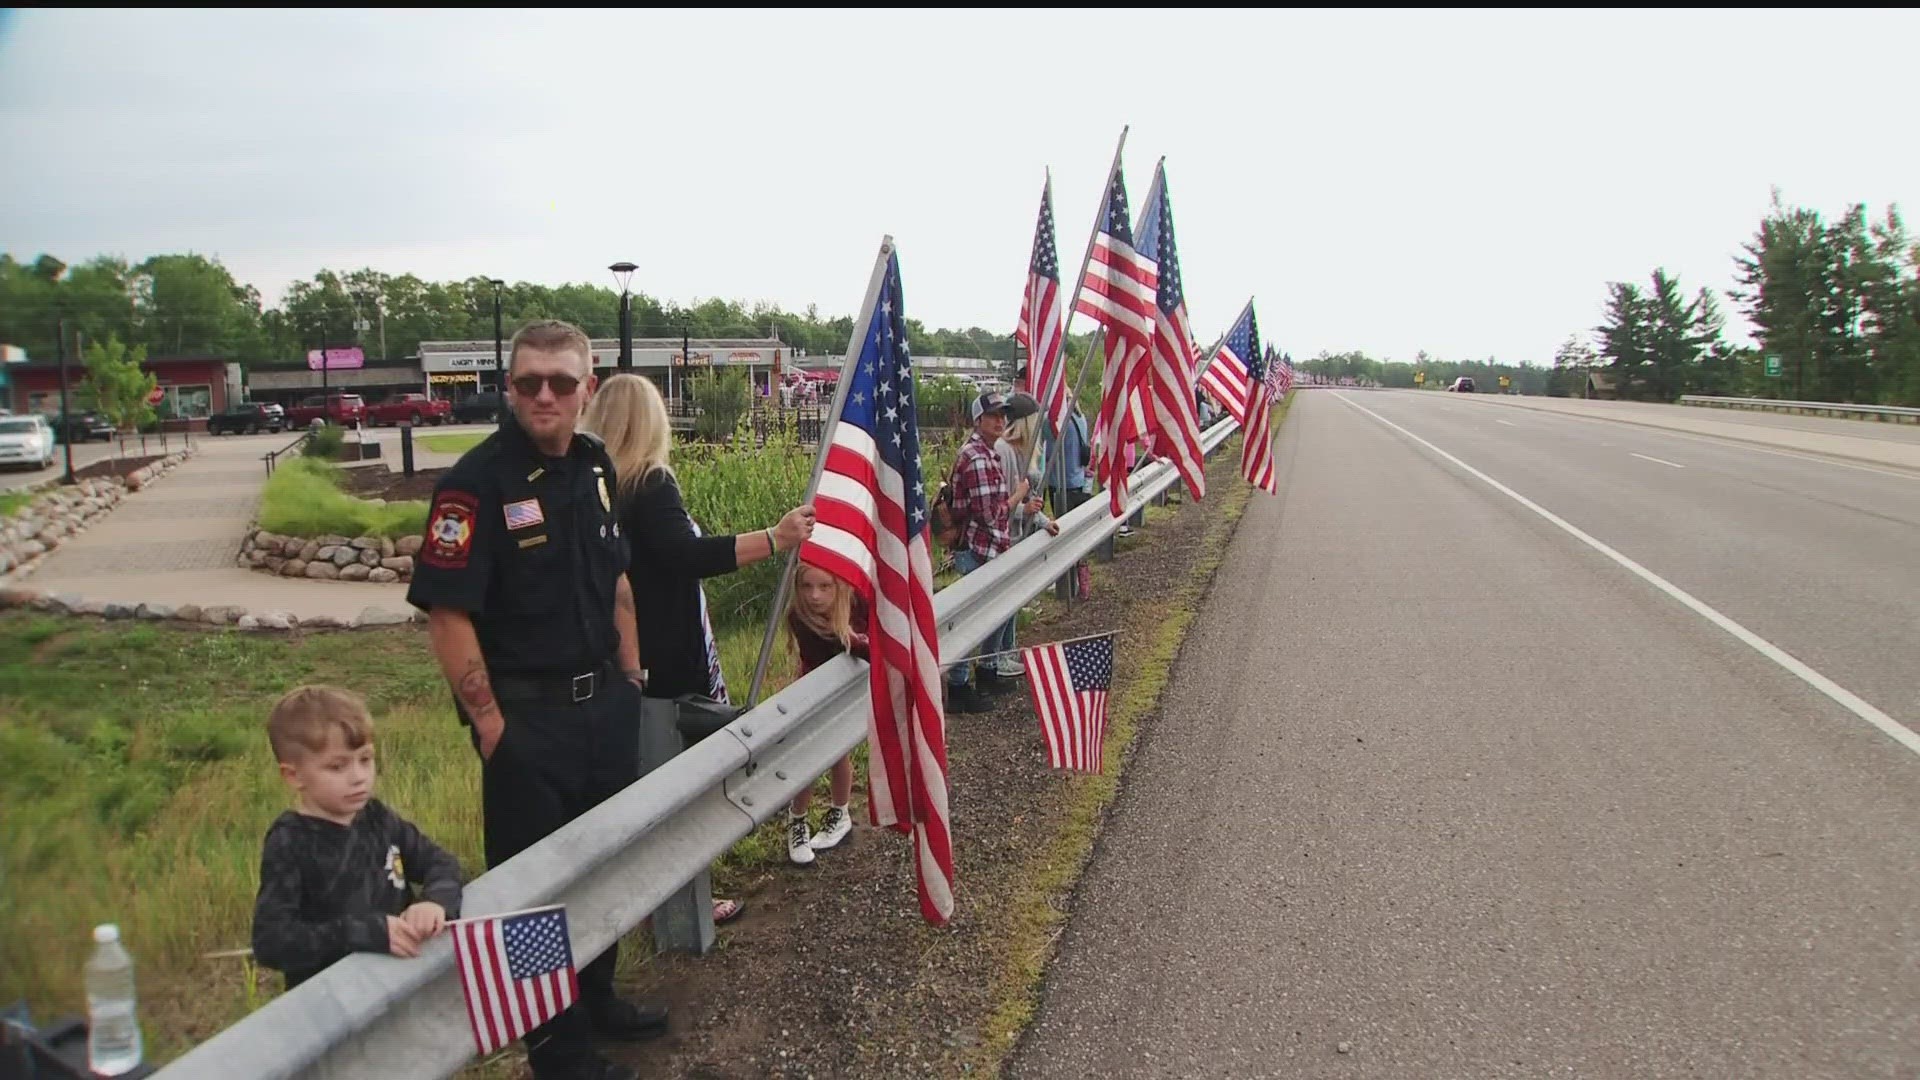 Crowds lined Highway 371 for miles to show their support for the family of the fallen officer.